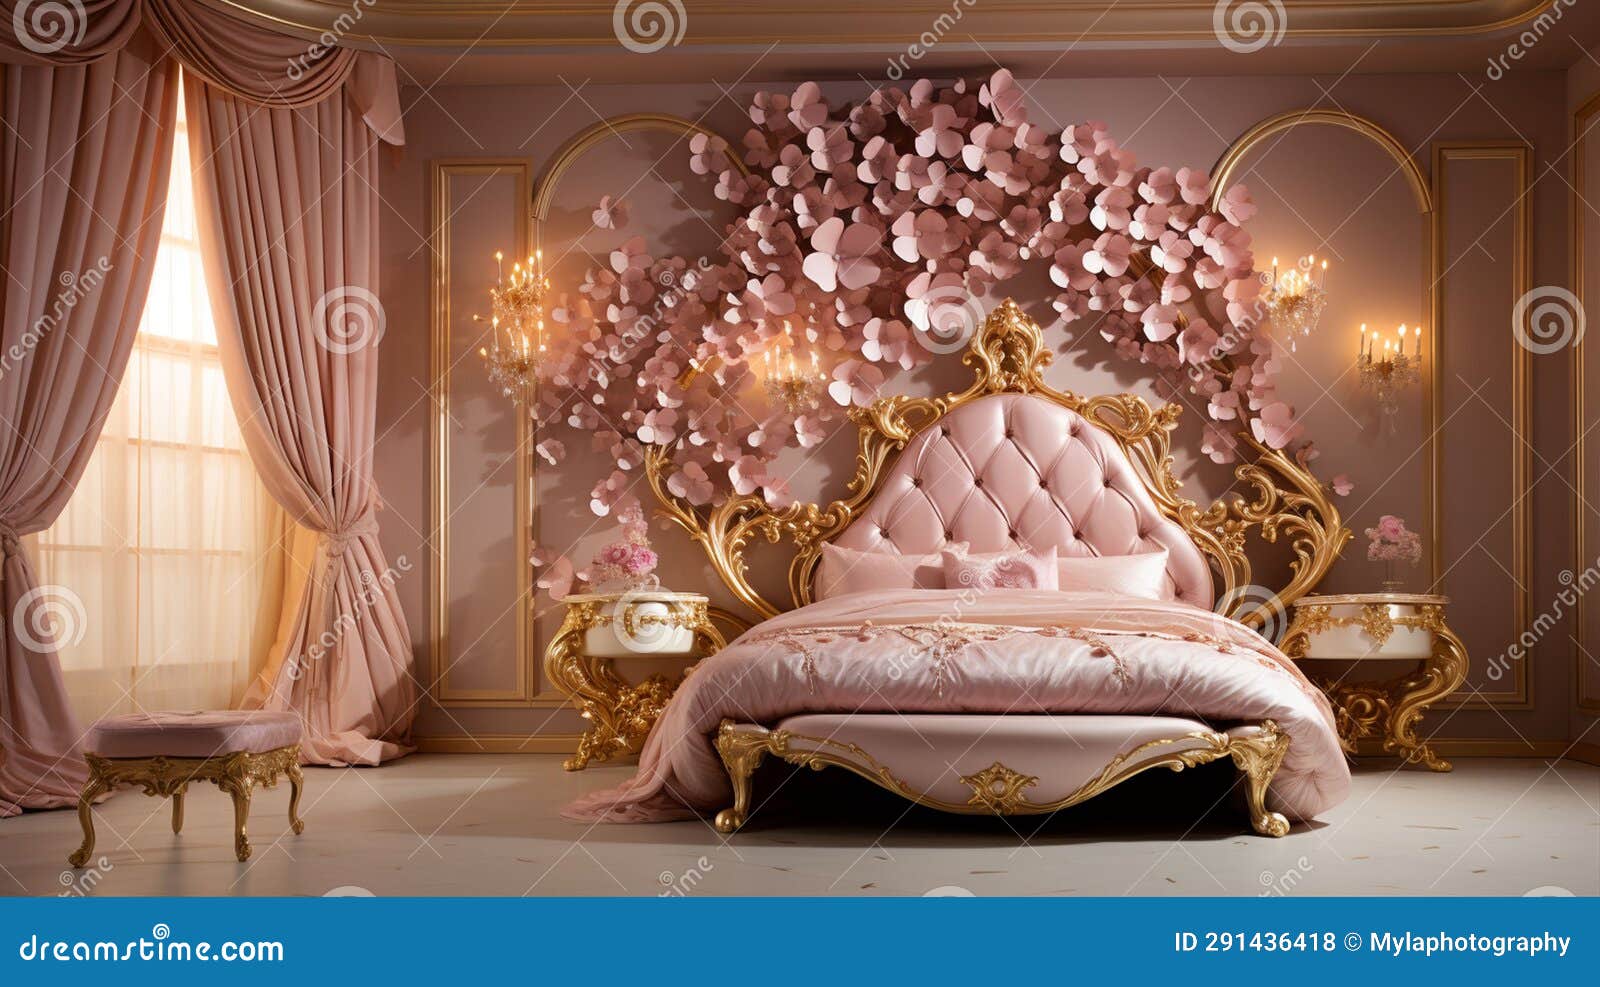 gold leaf bed adorned with pink flowers